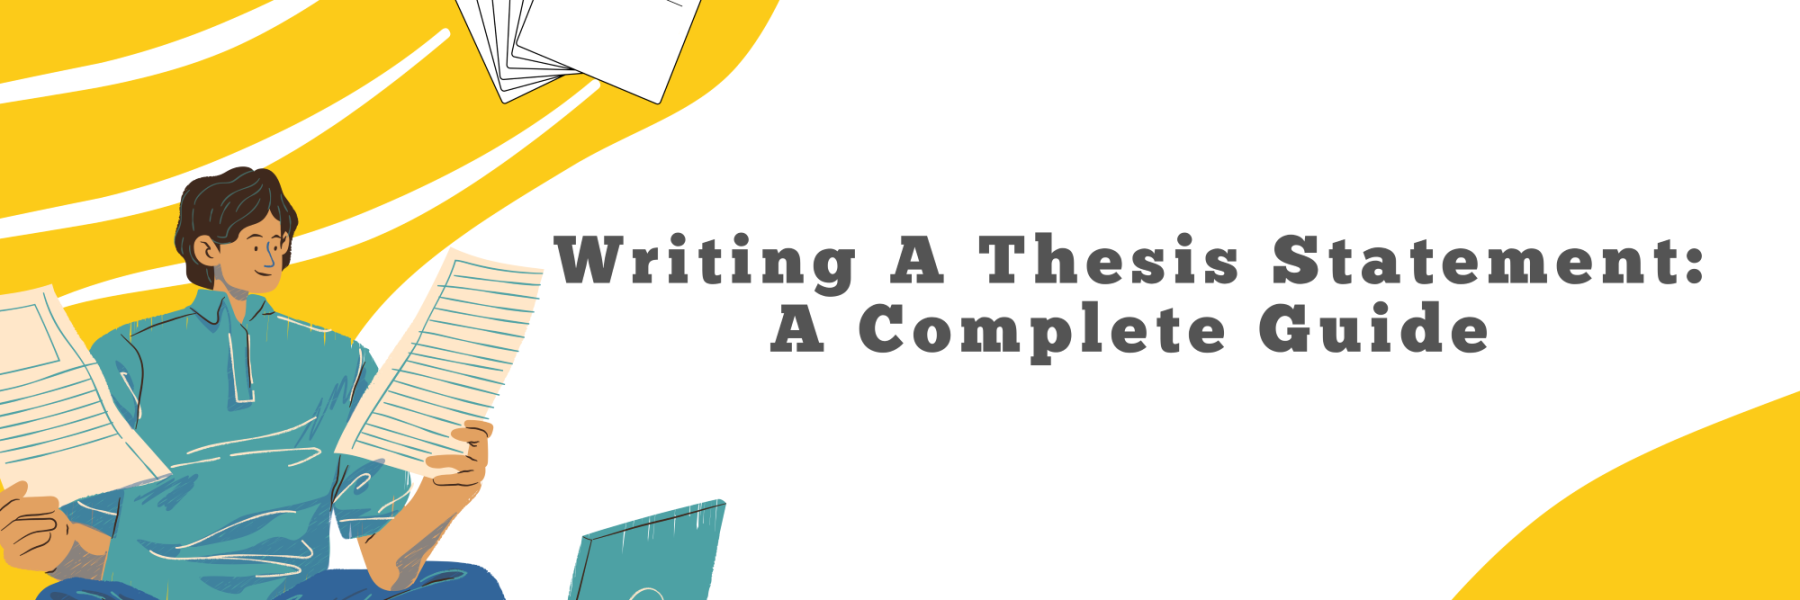 A complete guide to writing a thesis statement